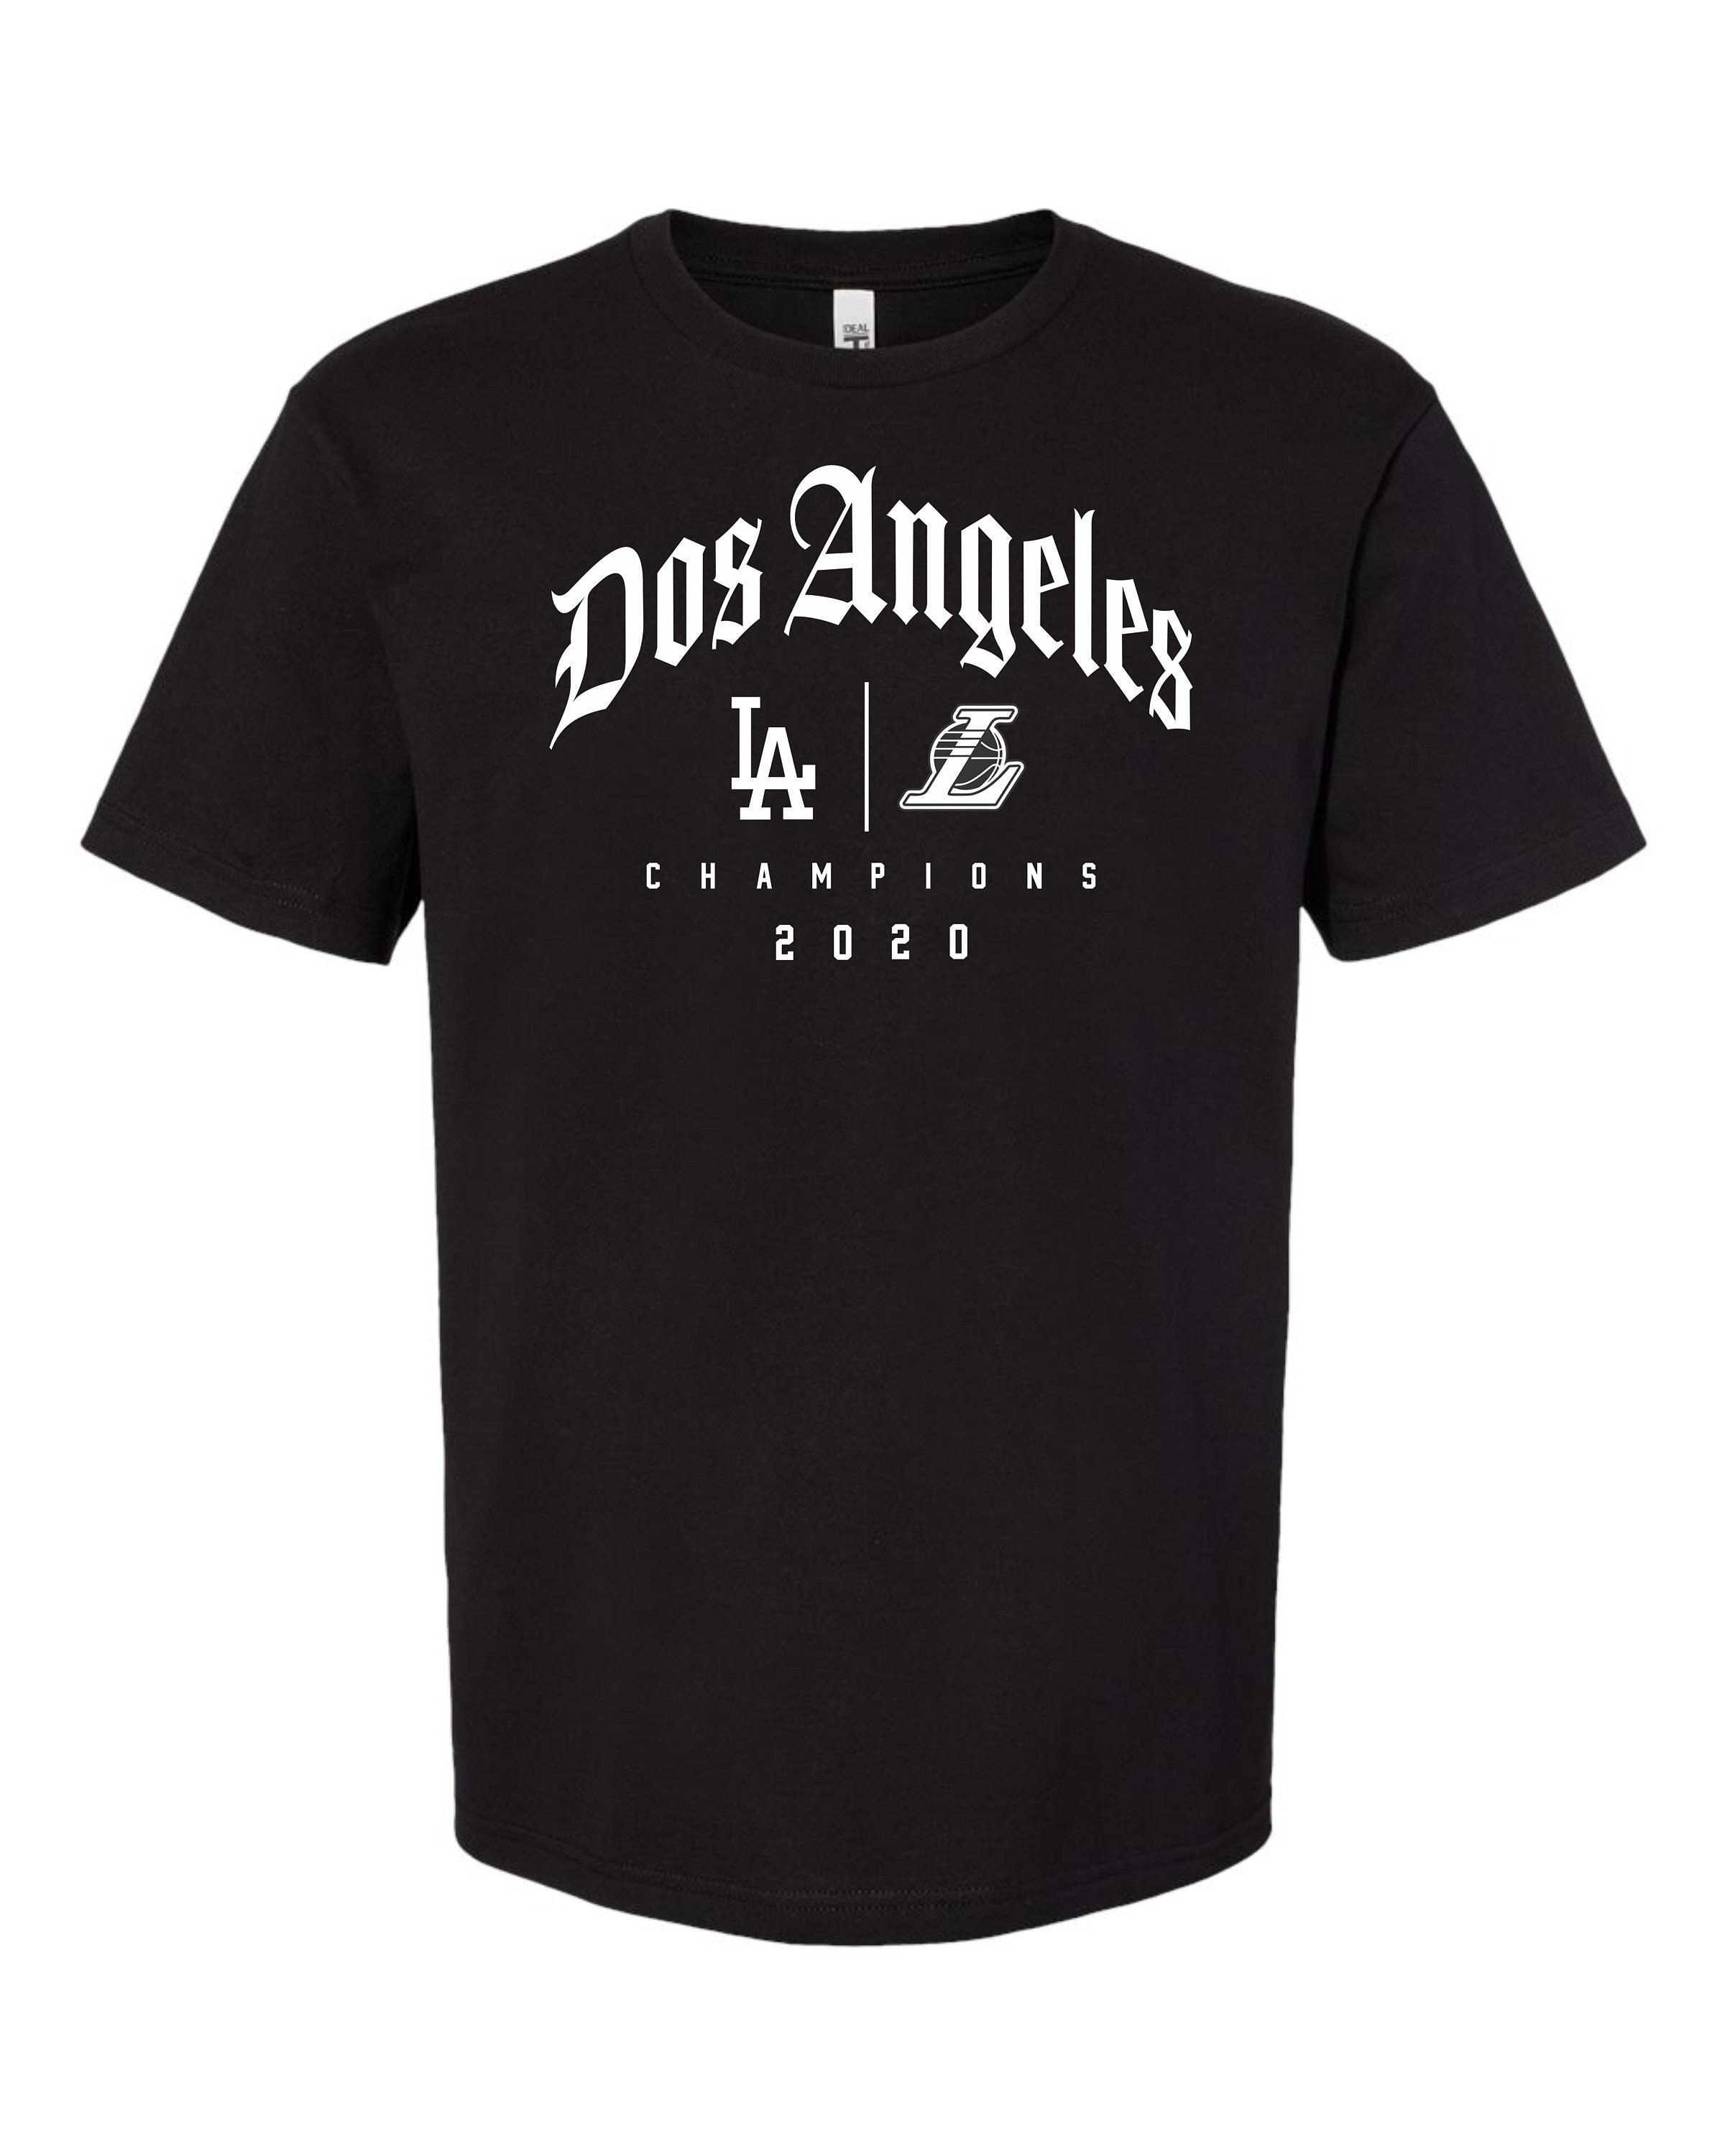  Los Angeles Dodgers LA Lakers Dos Angeles City of Champions  3x5 Flag : Sports & Outdoors